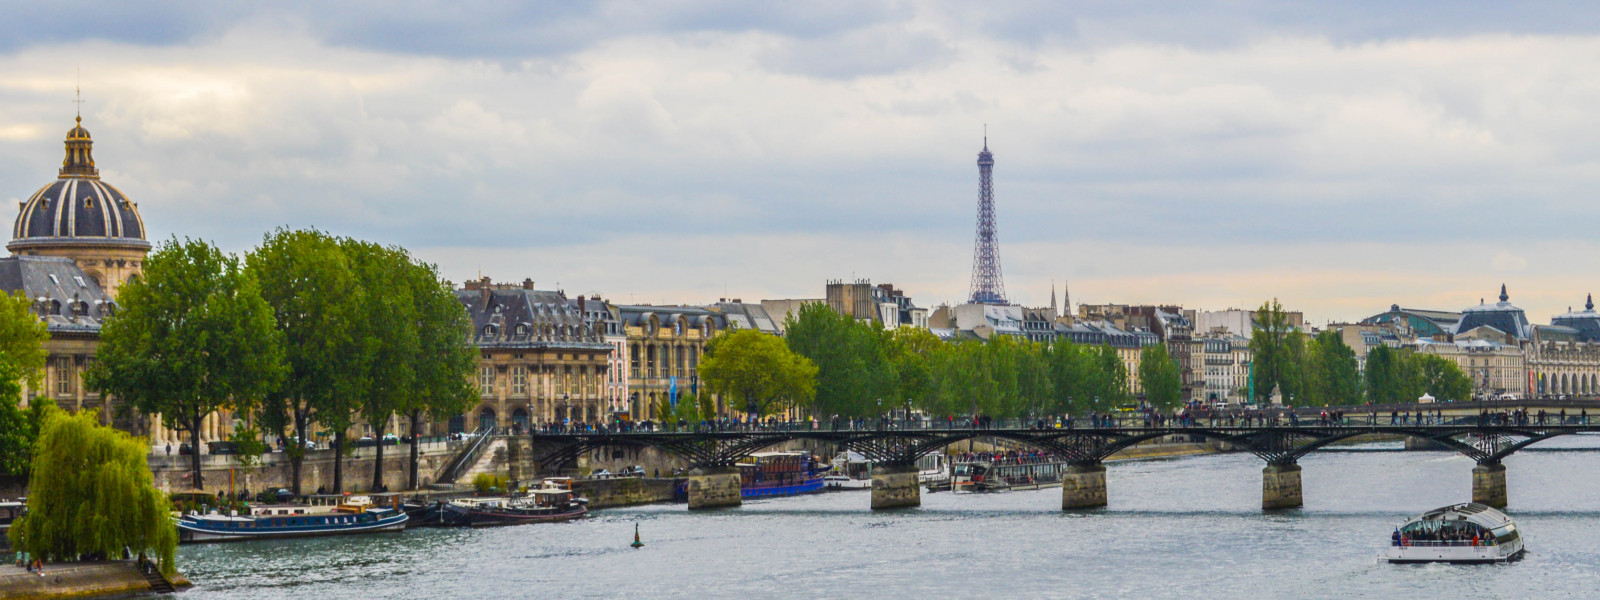 View of the river and Eiffel Tower